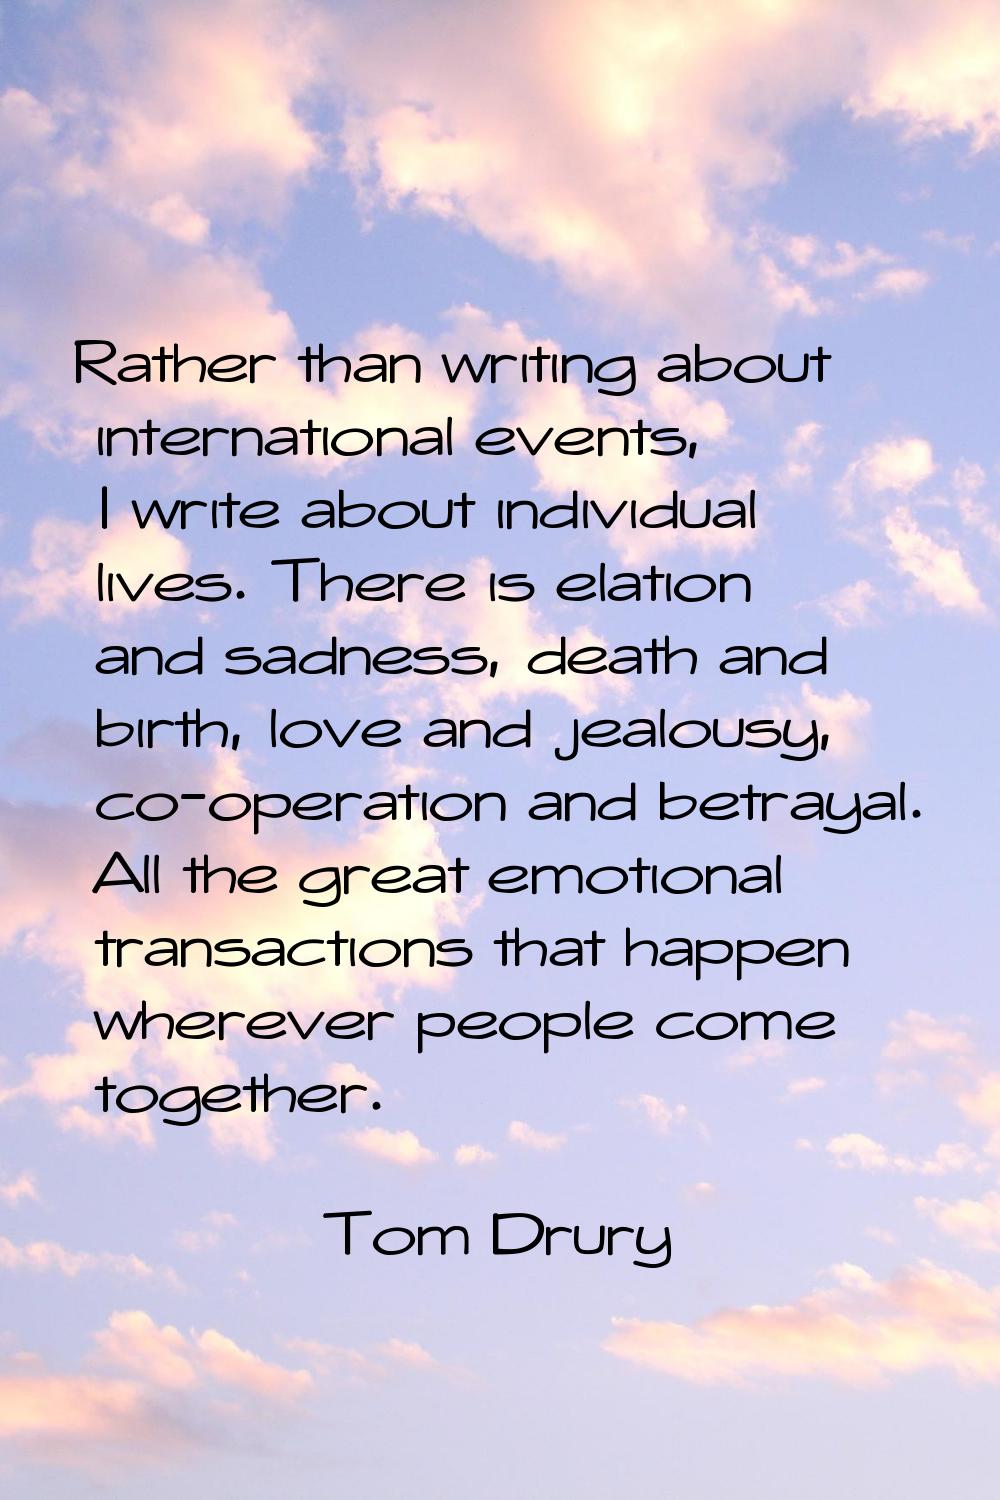 Rather than writing about international events, I write about individual lives. There is elation an